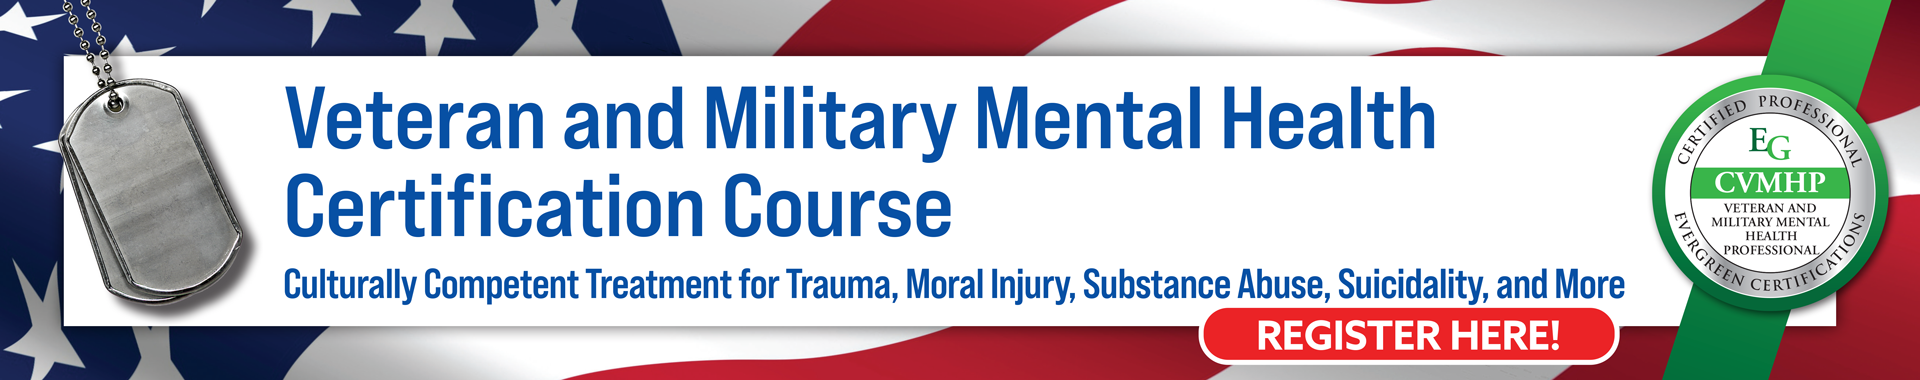 Veteran and Military Mental Health Certification Course